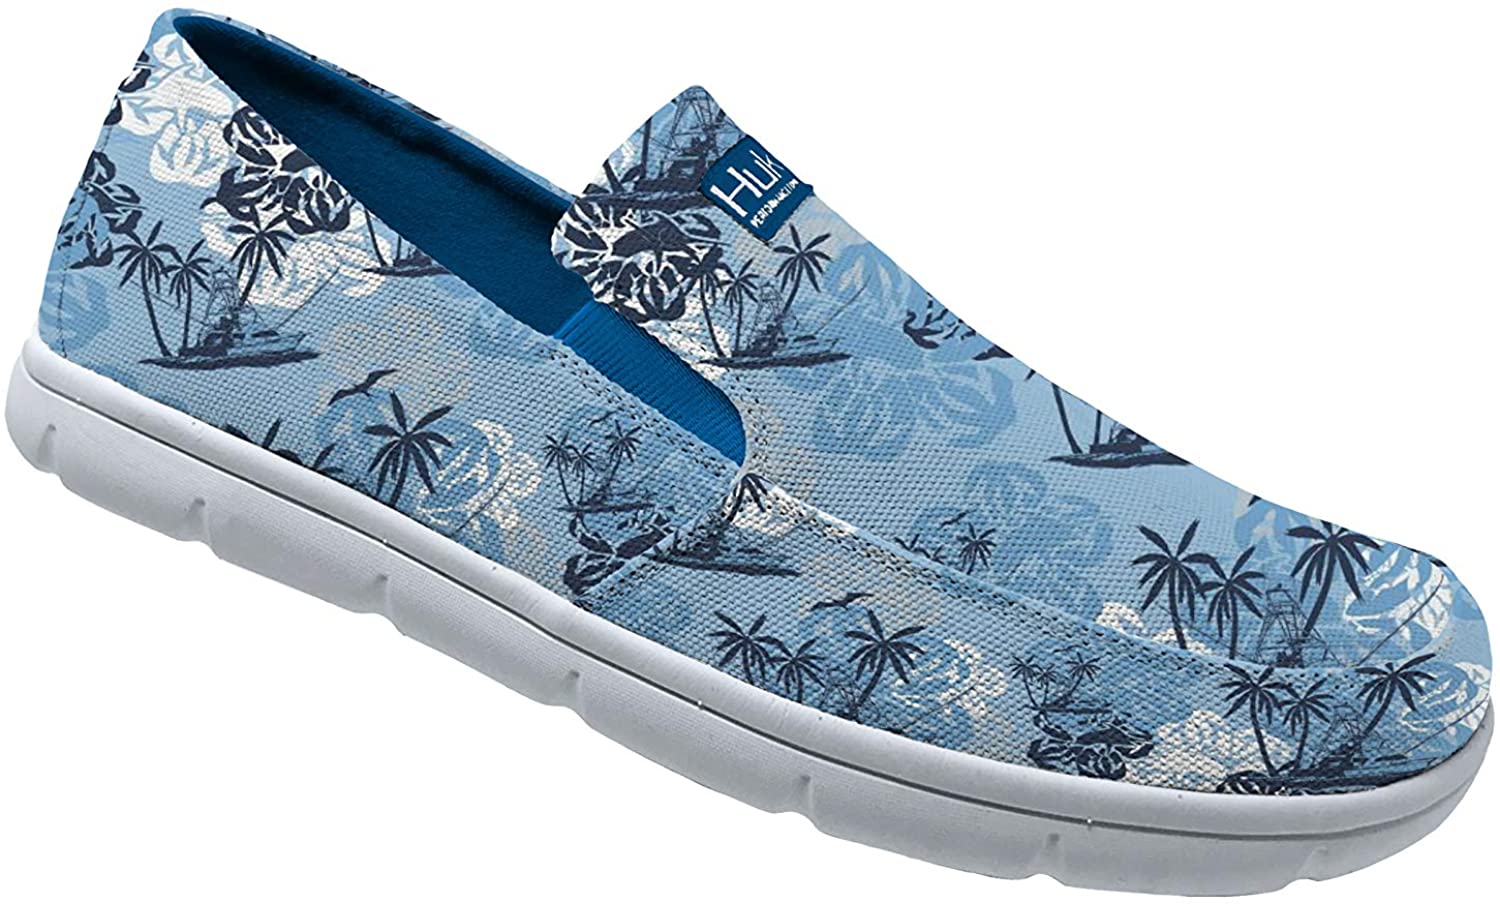 Men's Huk Brewster Print Slip-On Shoe in Paradise Pass Ice Blue from the side